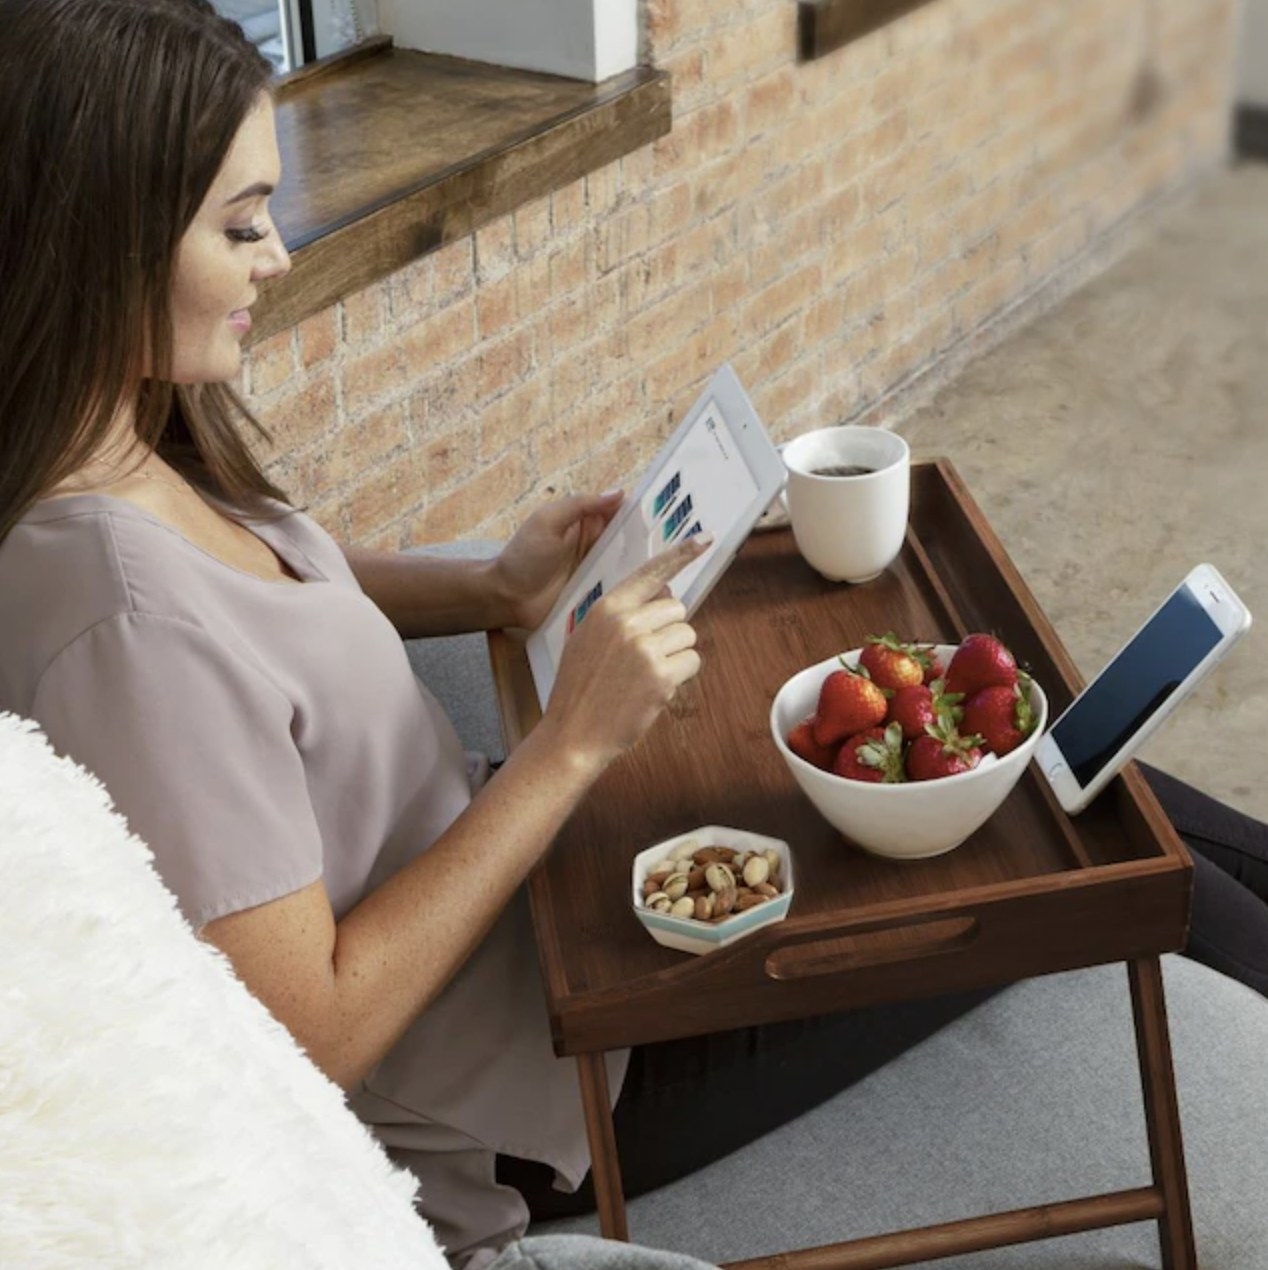 Model relaxing on bean bag with tray being used to hold tablet and phone, coffee and snacks